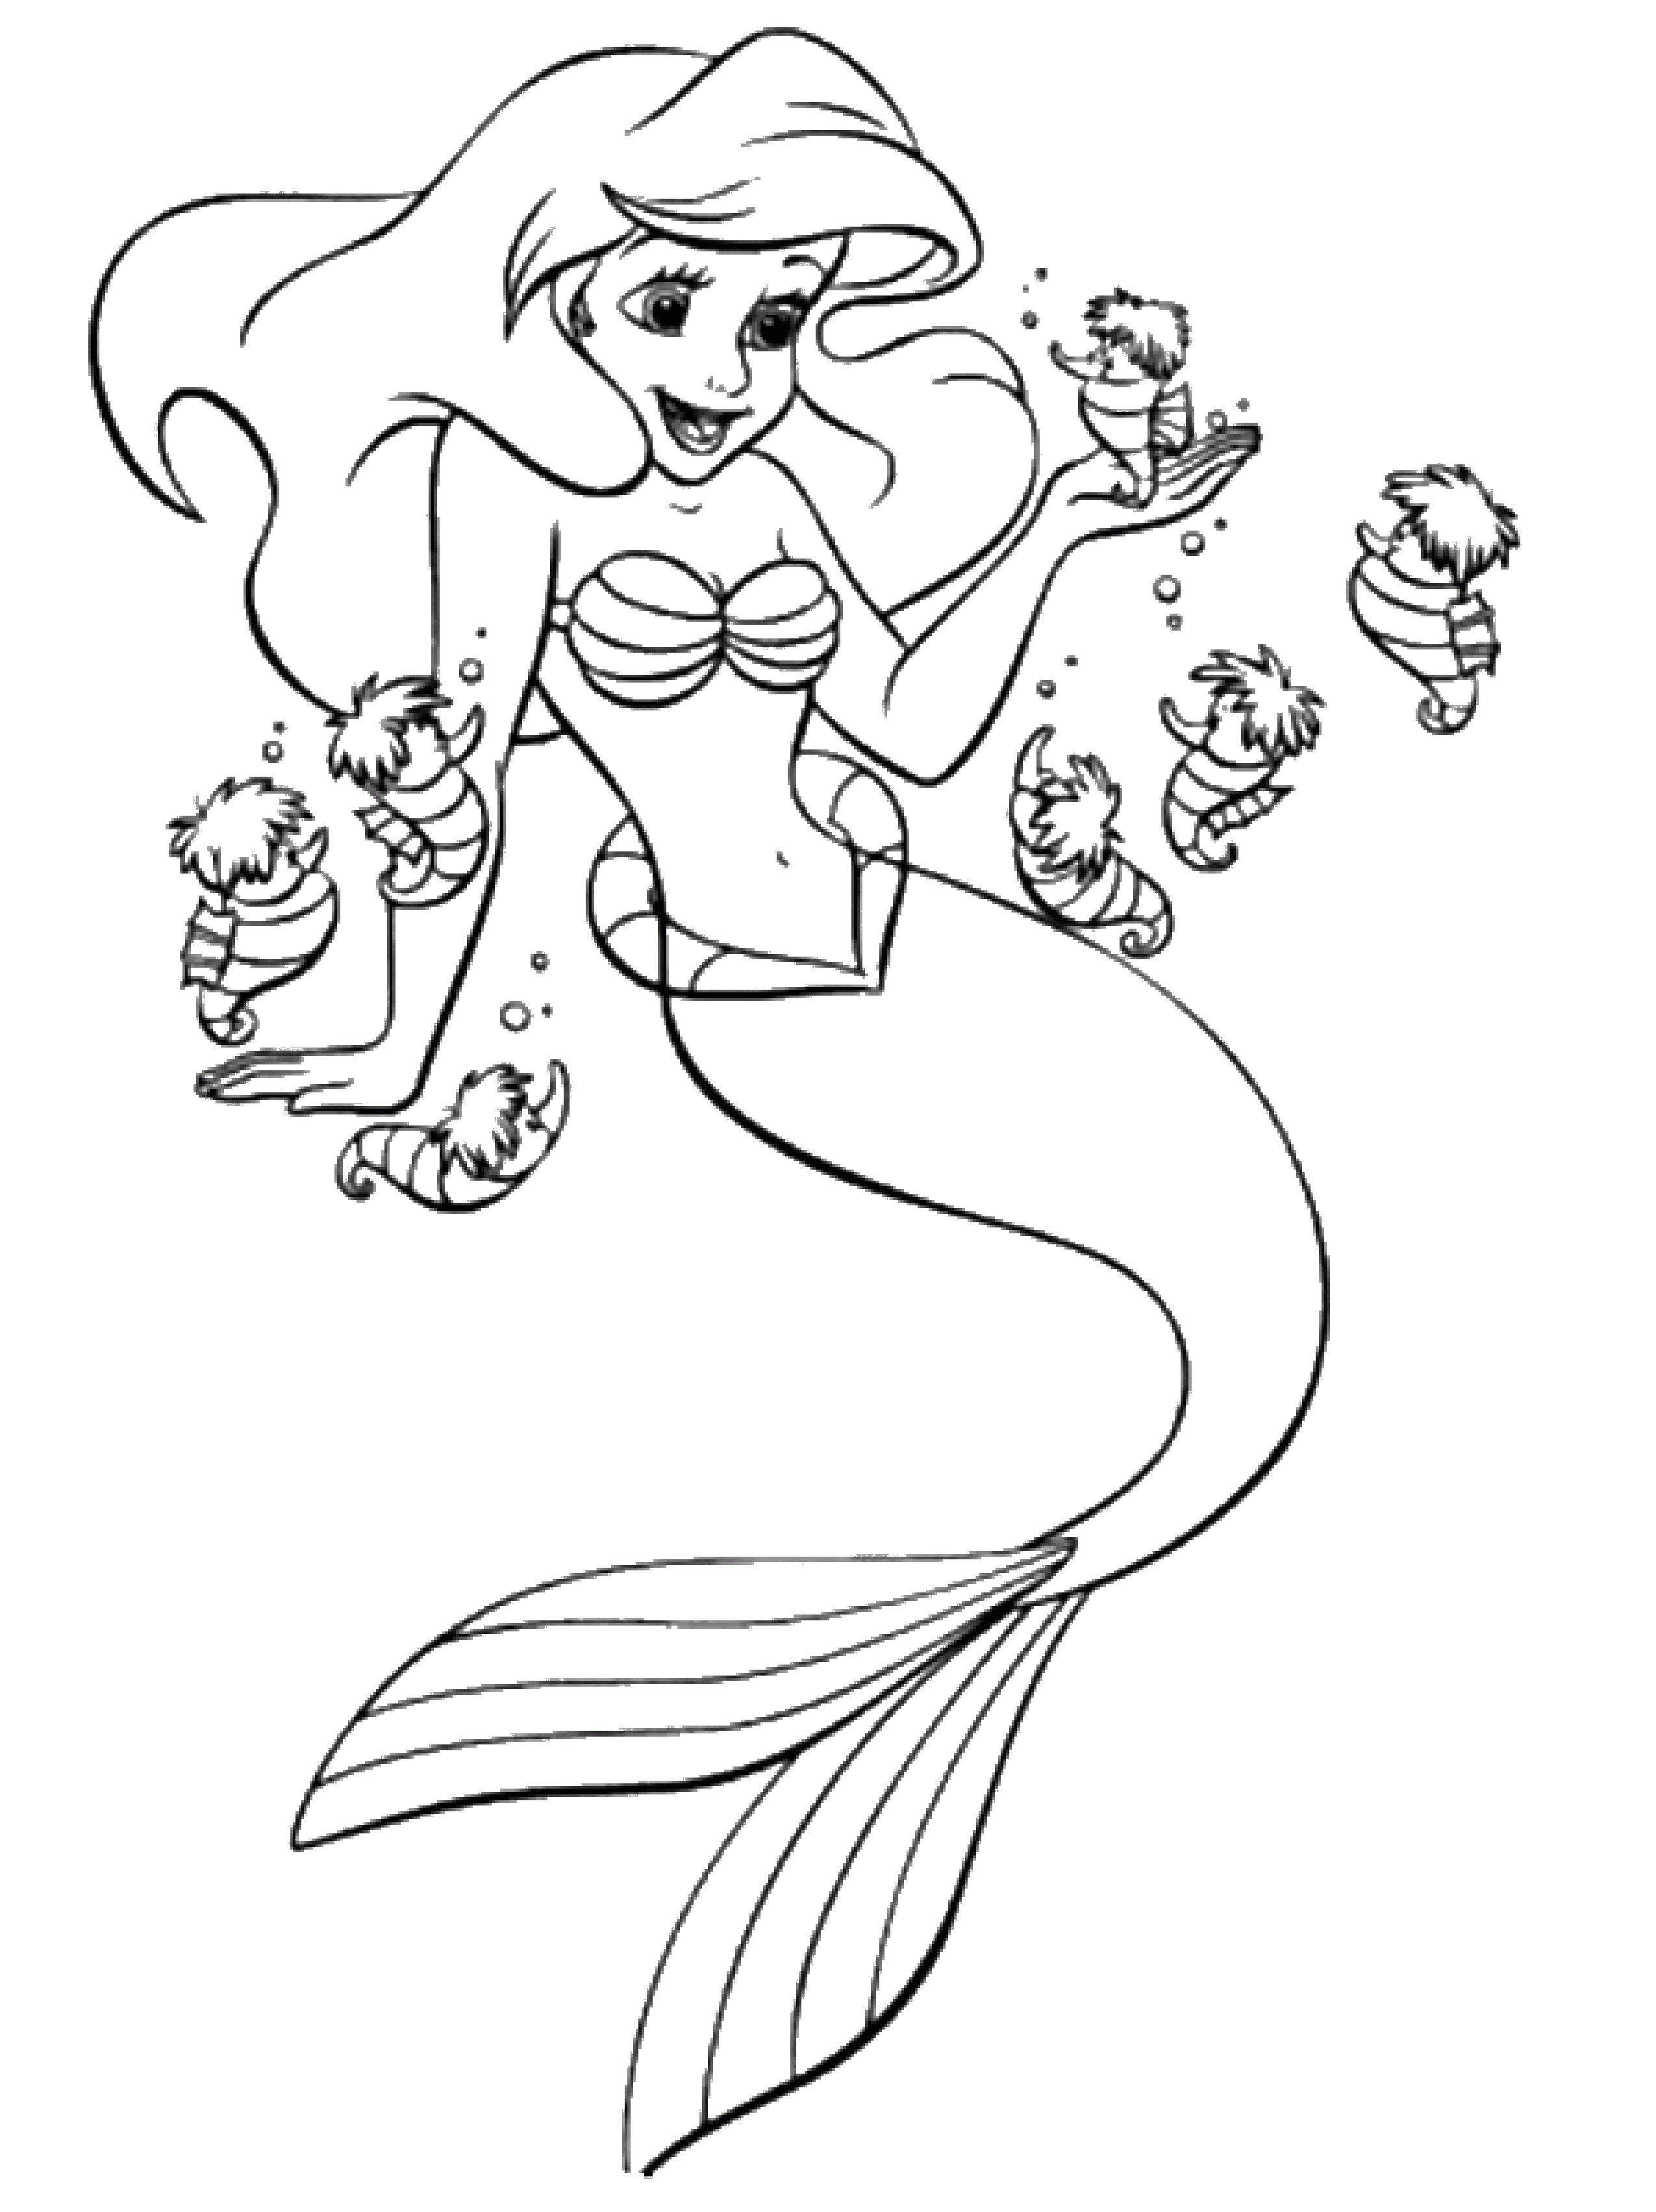 Coloring Ariel and flounder the fish. Category The little mermaid. Tags:  Ariel, mermaid.